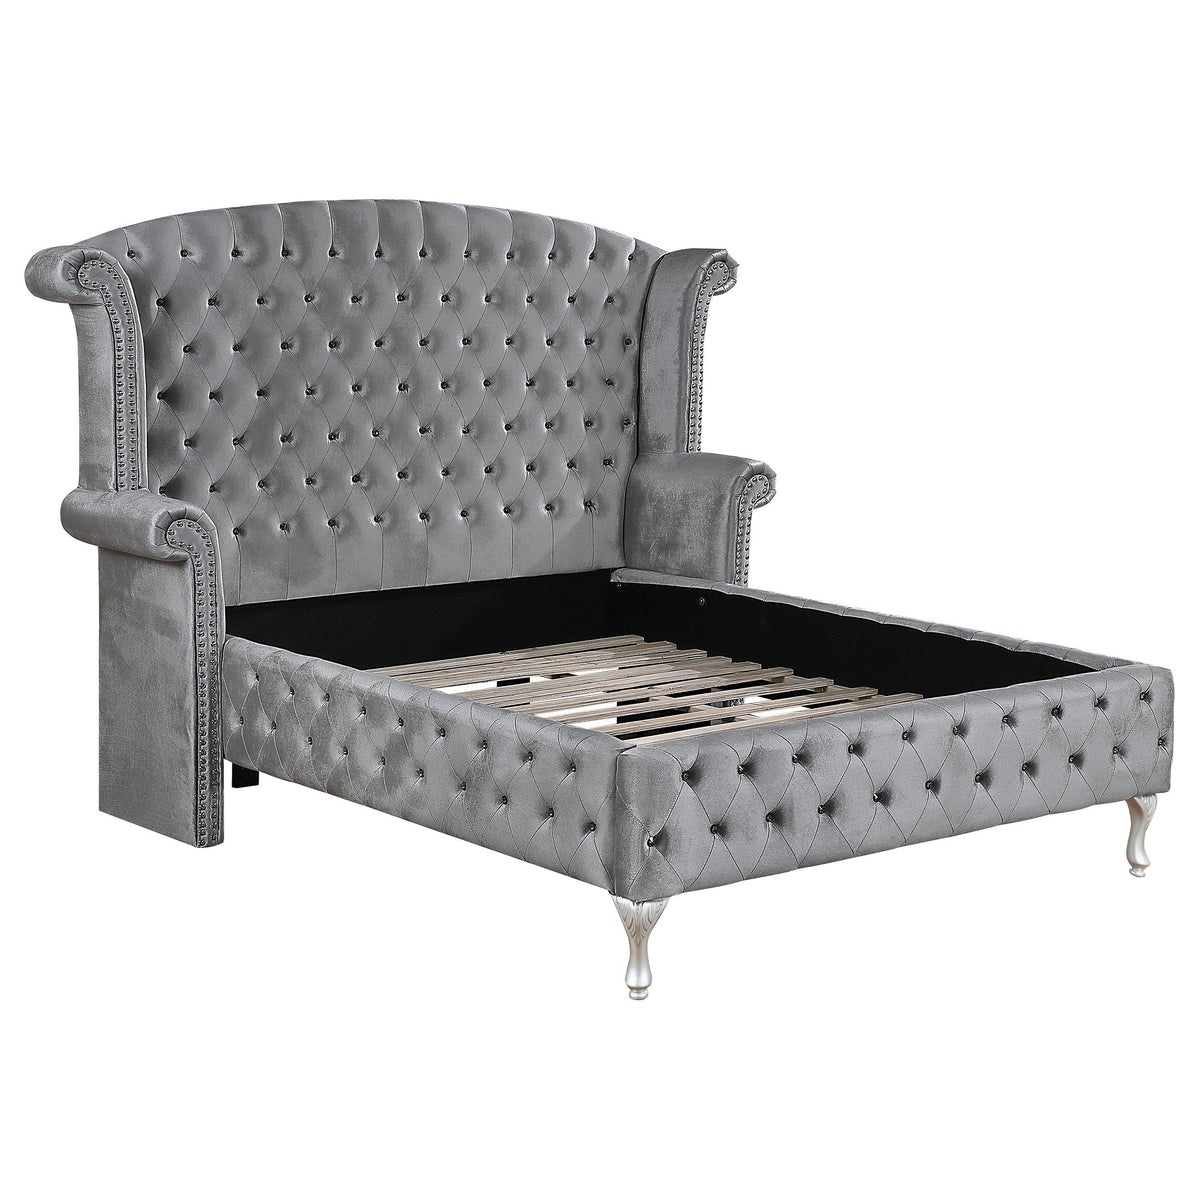 Deanna Queen Tufted Upholstered Bed Grey  Las Vegas Furniture Stores